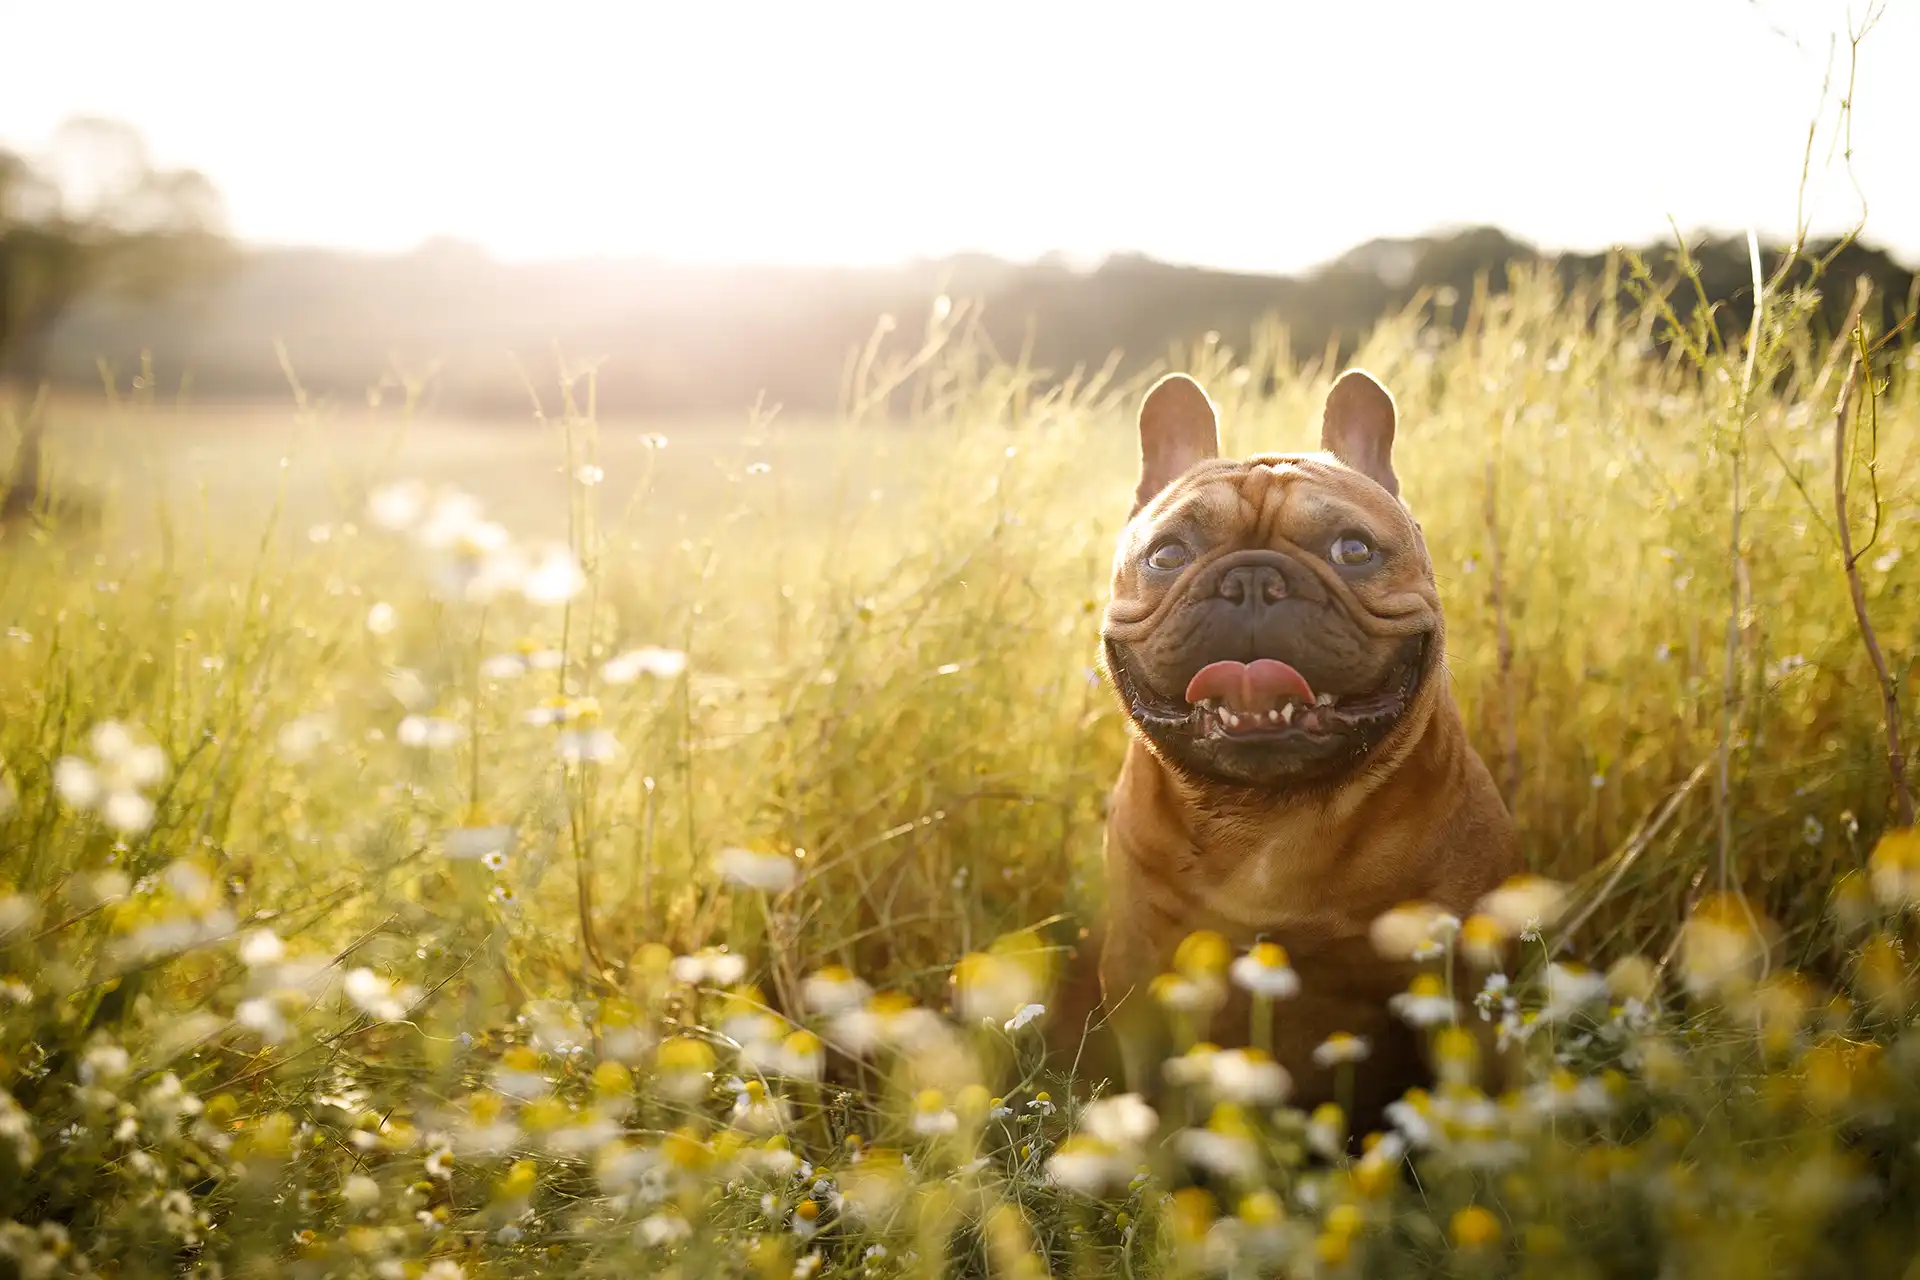 Smiling pug dog sitting in a field of grass.